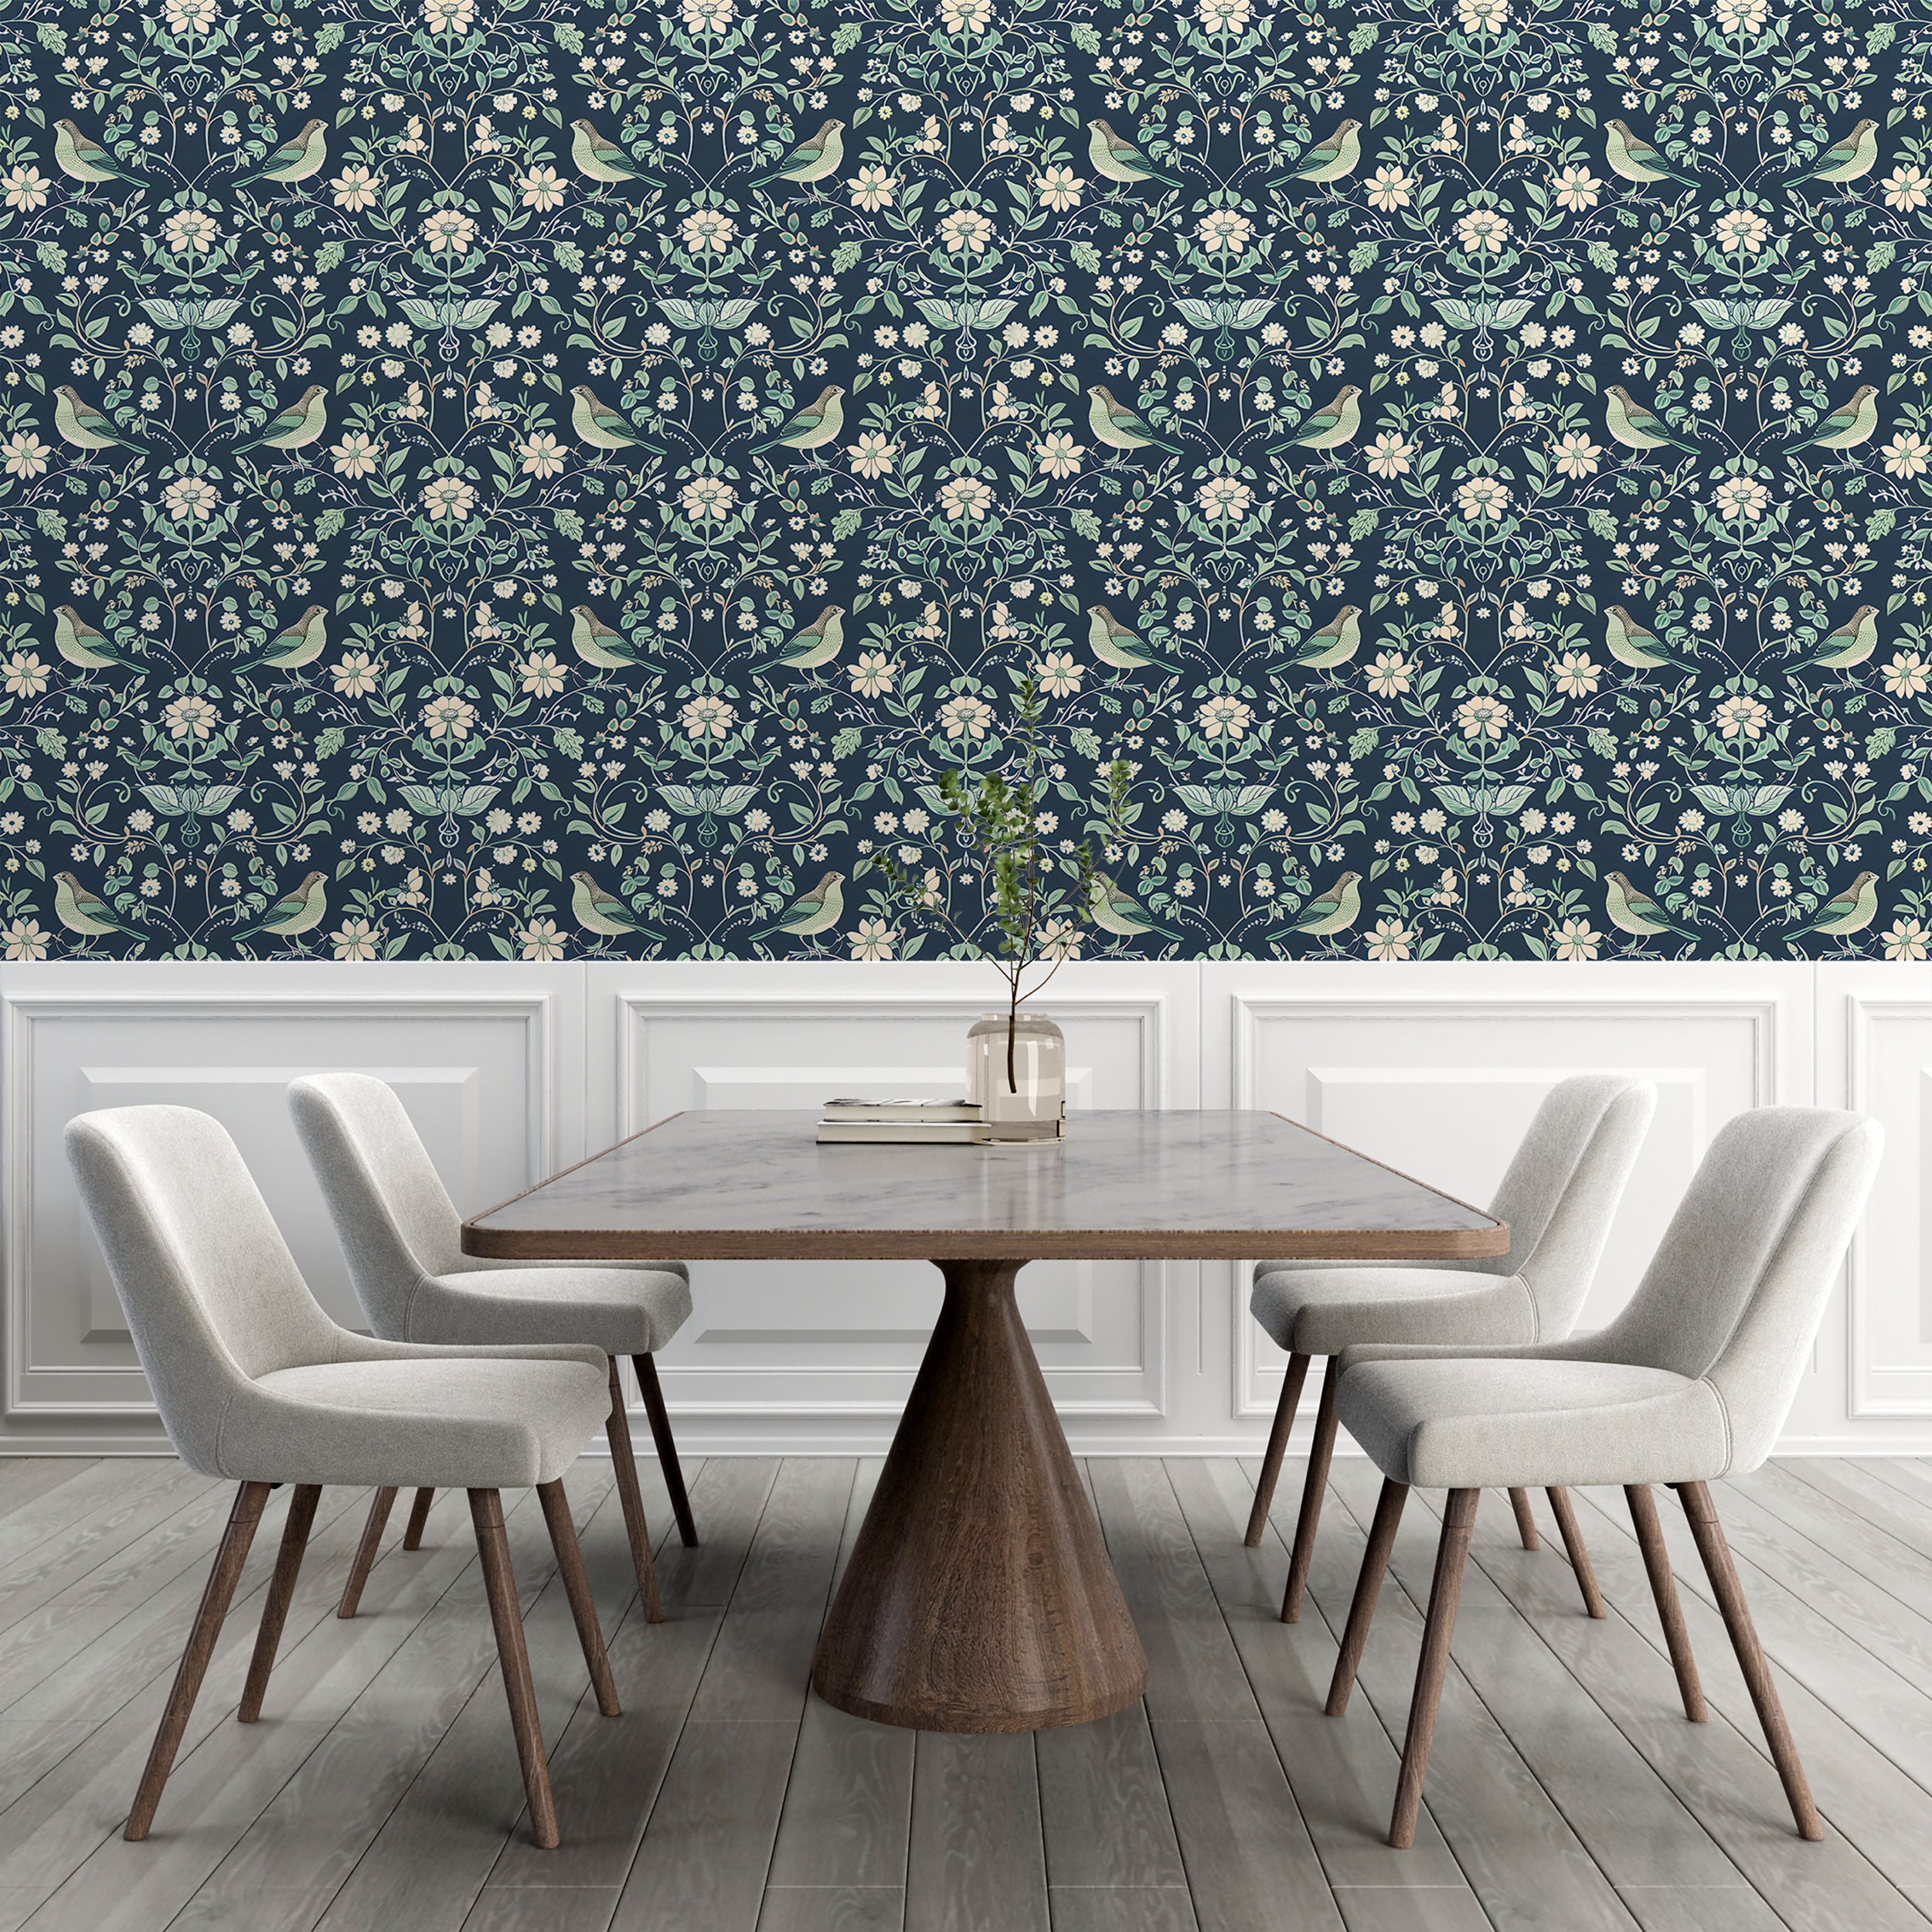 Mint and Navy Blue Chinoiserie Wallpaper, Peel and Stick Floral Wall Decal, Birds Flowers and Leaves Pattern Removable Wallpaper, Vintage Wall Art